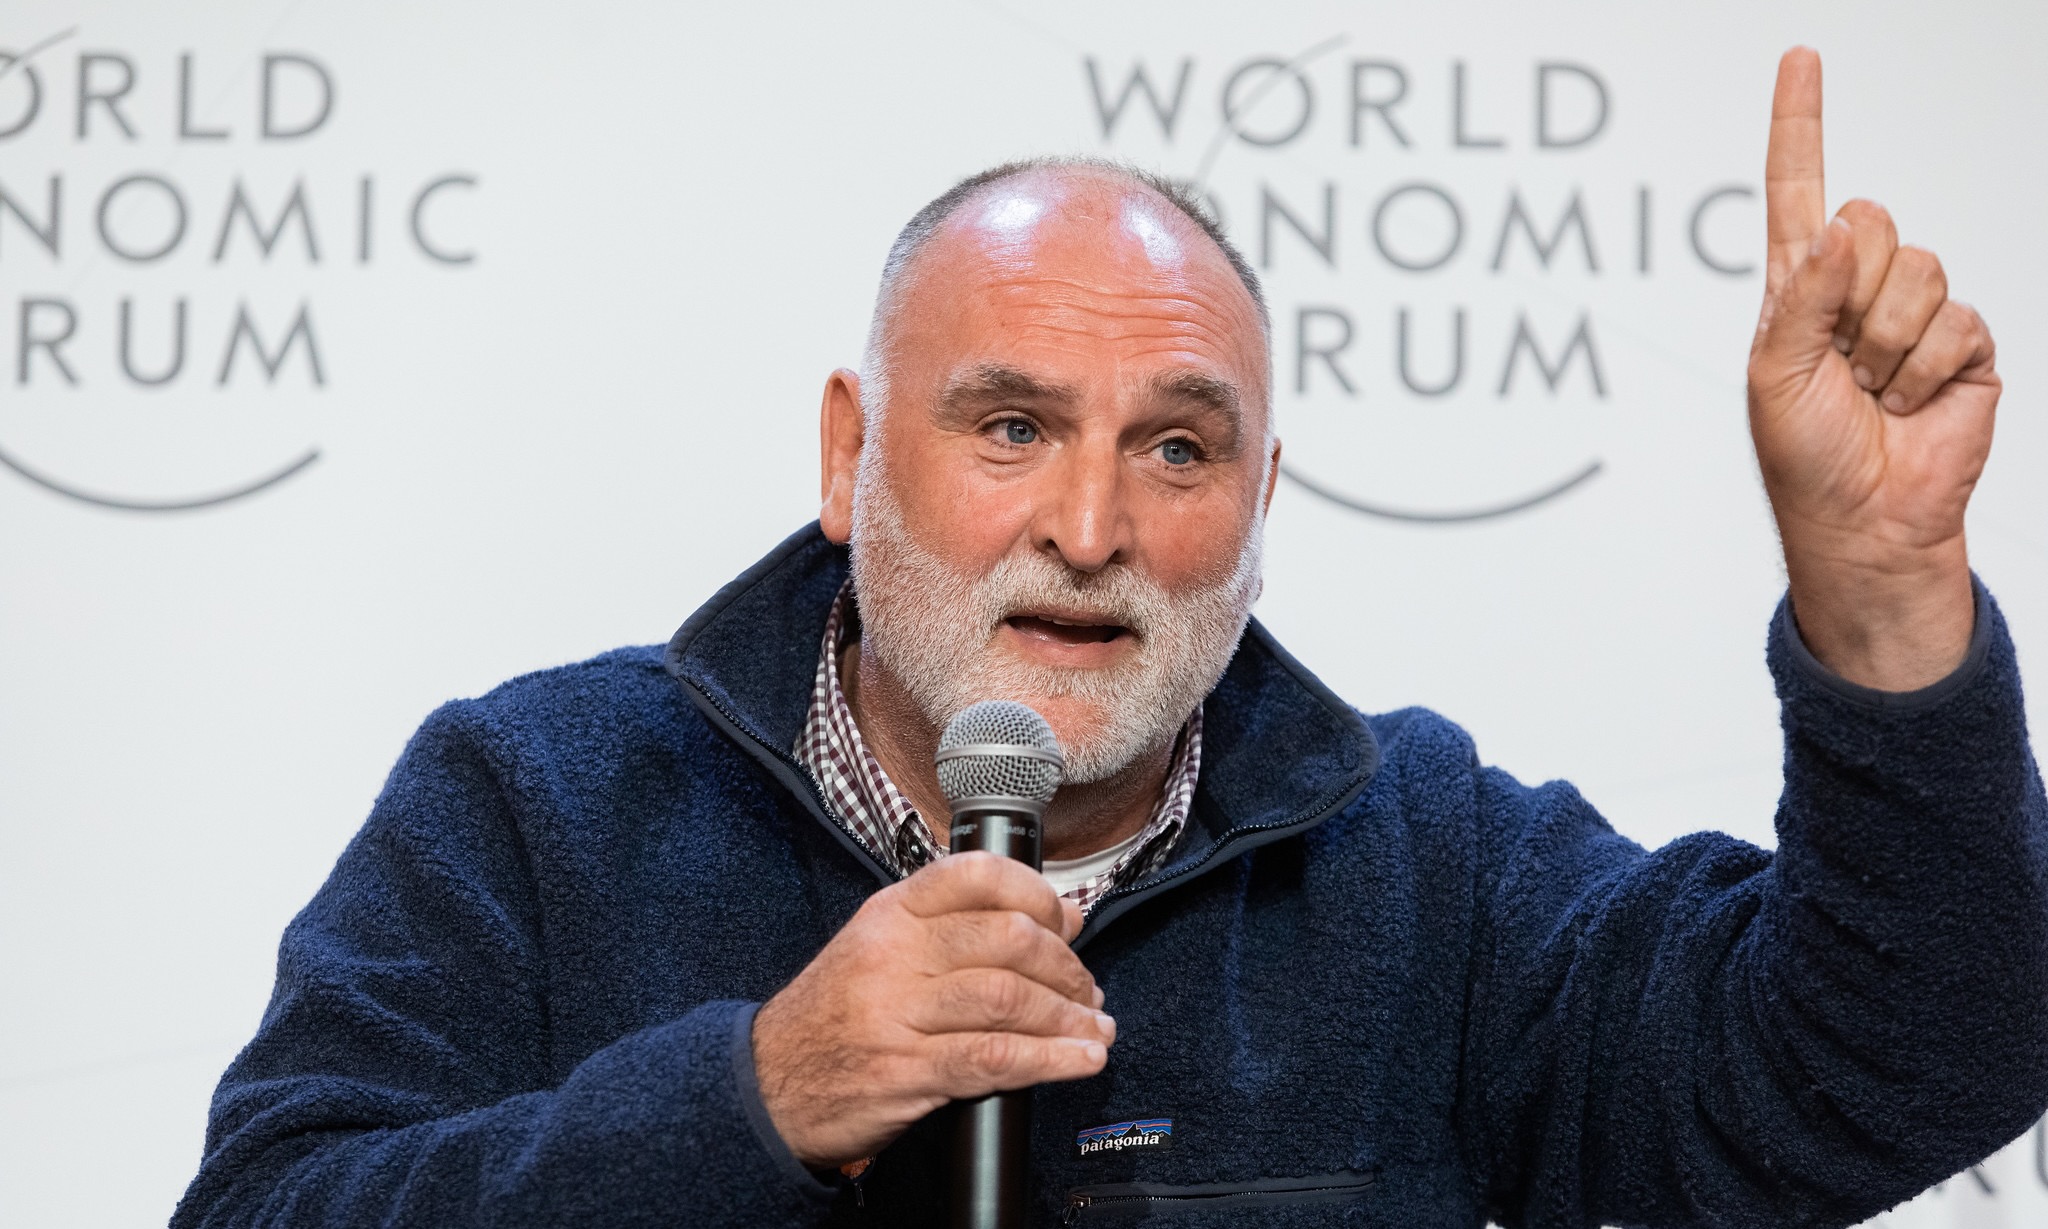 A photograph of humanitarian and chef José Andrés speaking at the World Economic Forum. He is wearing a navy blue patagonia fleece, donning a beard and holding a microphone and pointing a finger in the air.